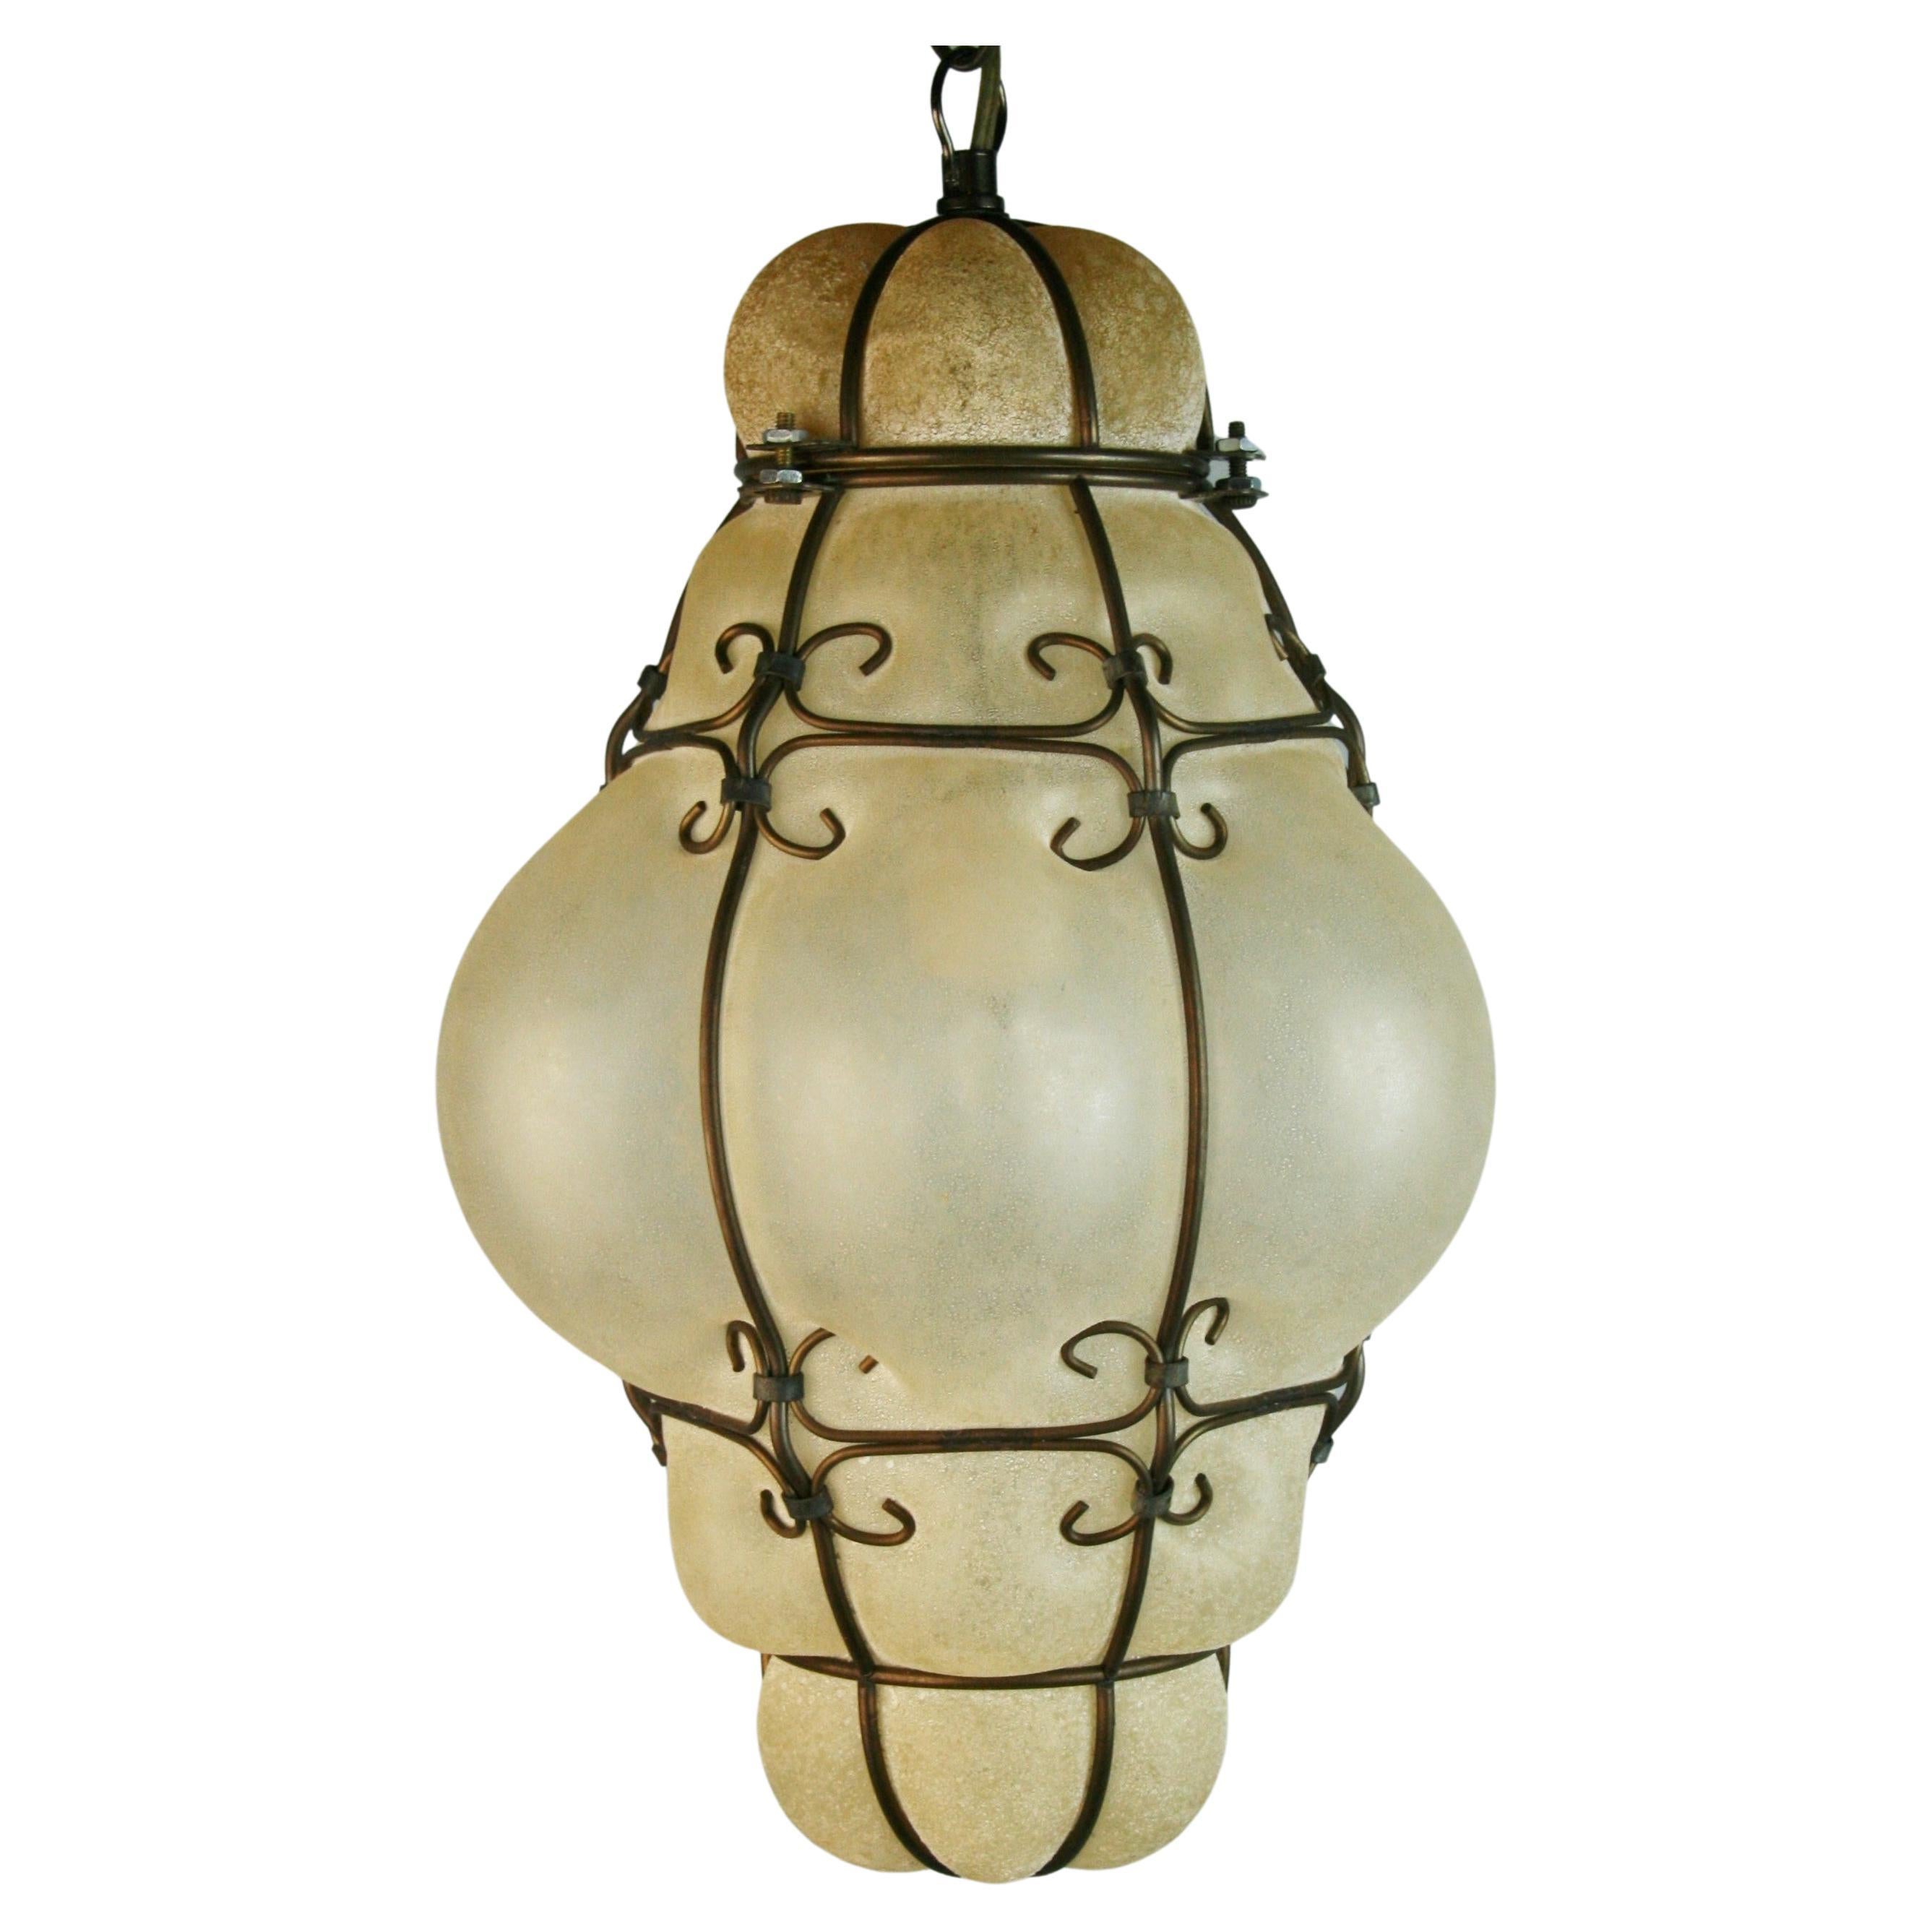 Venetian Clear Glass Pendant with Embedded Sand Finish